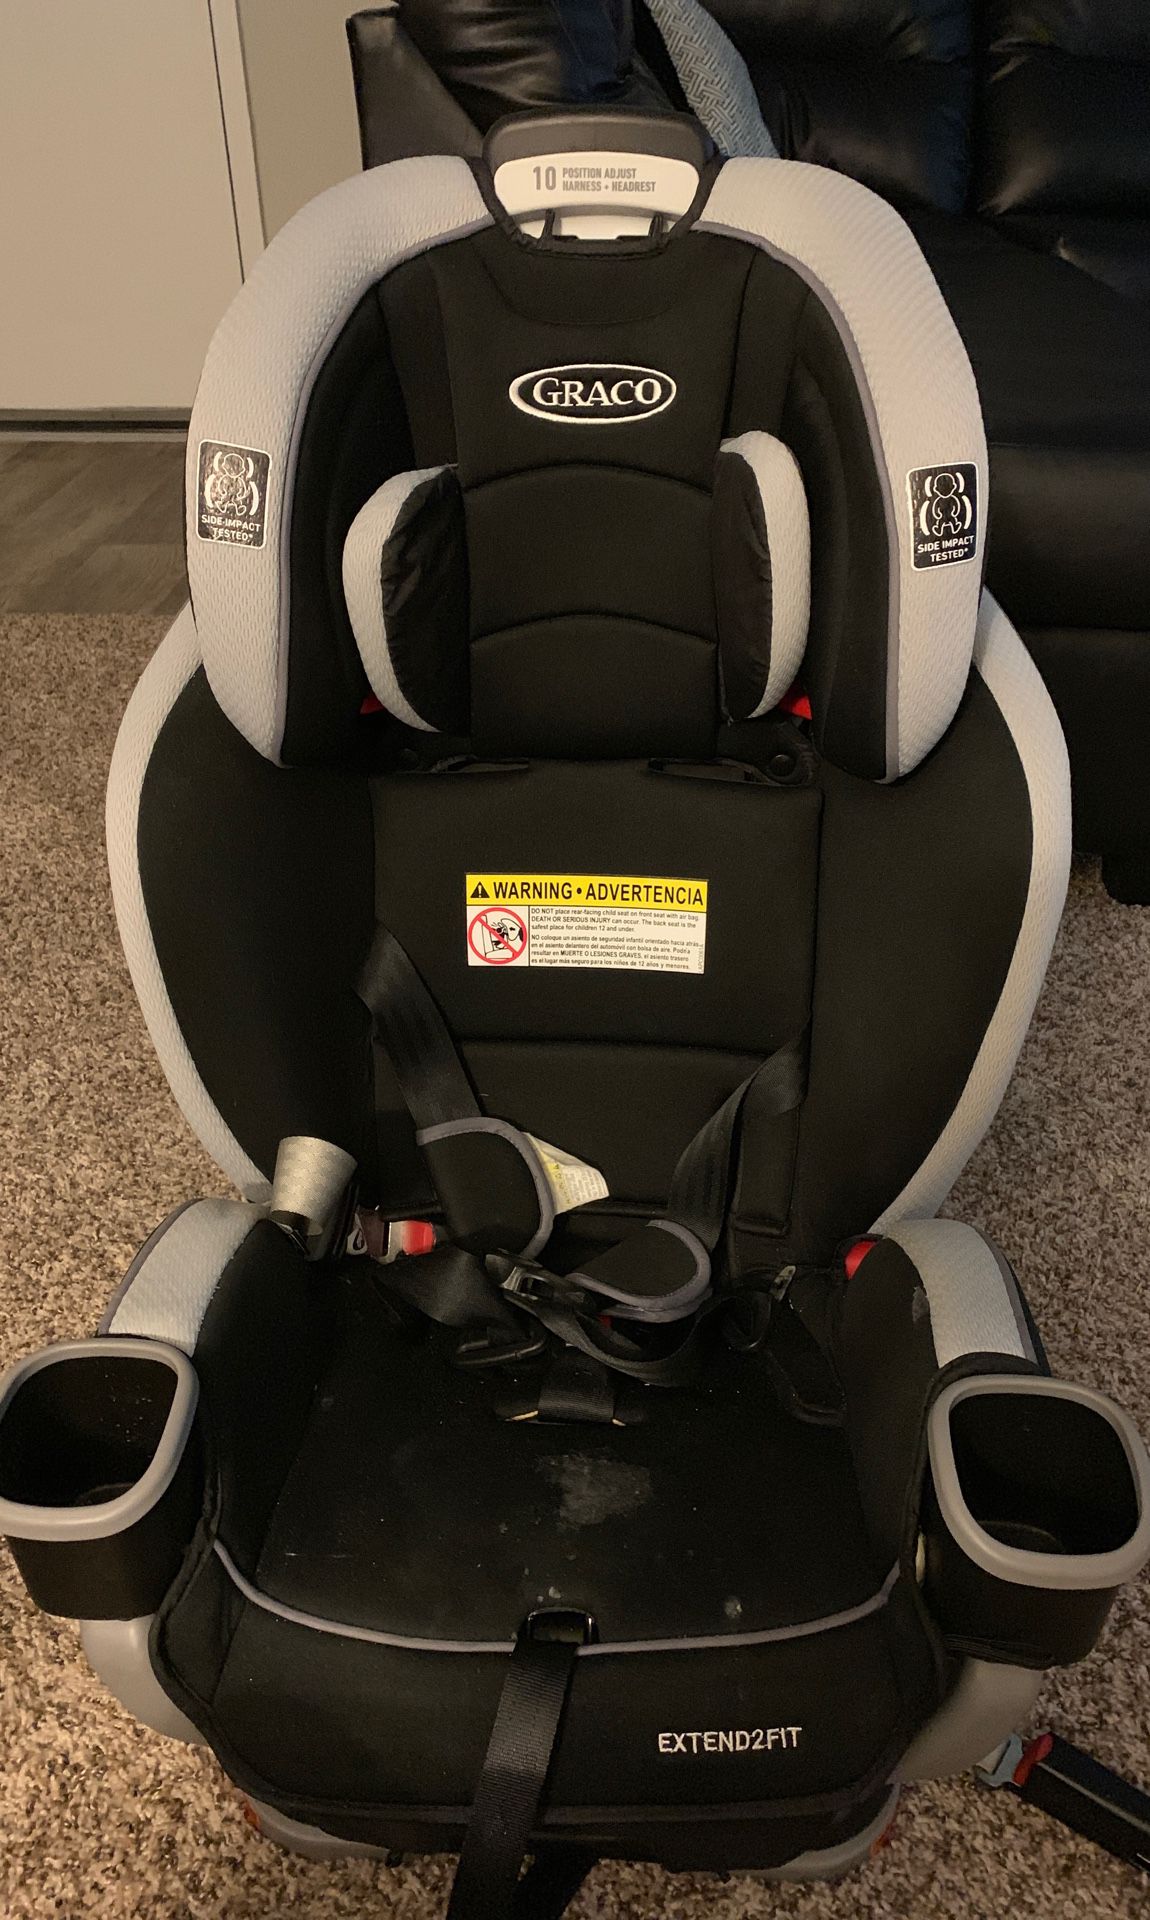 Graco extended fit car seat